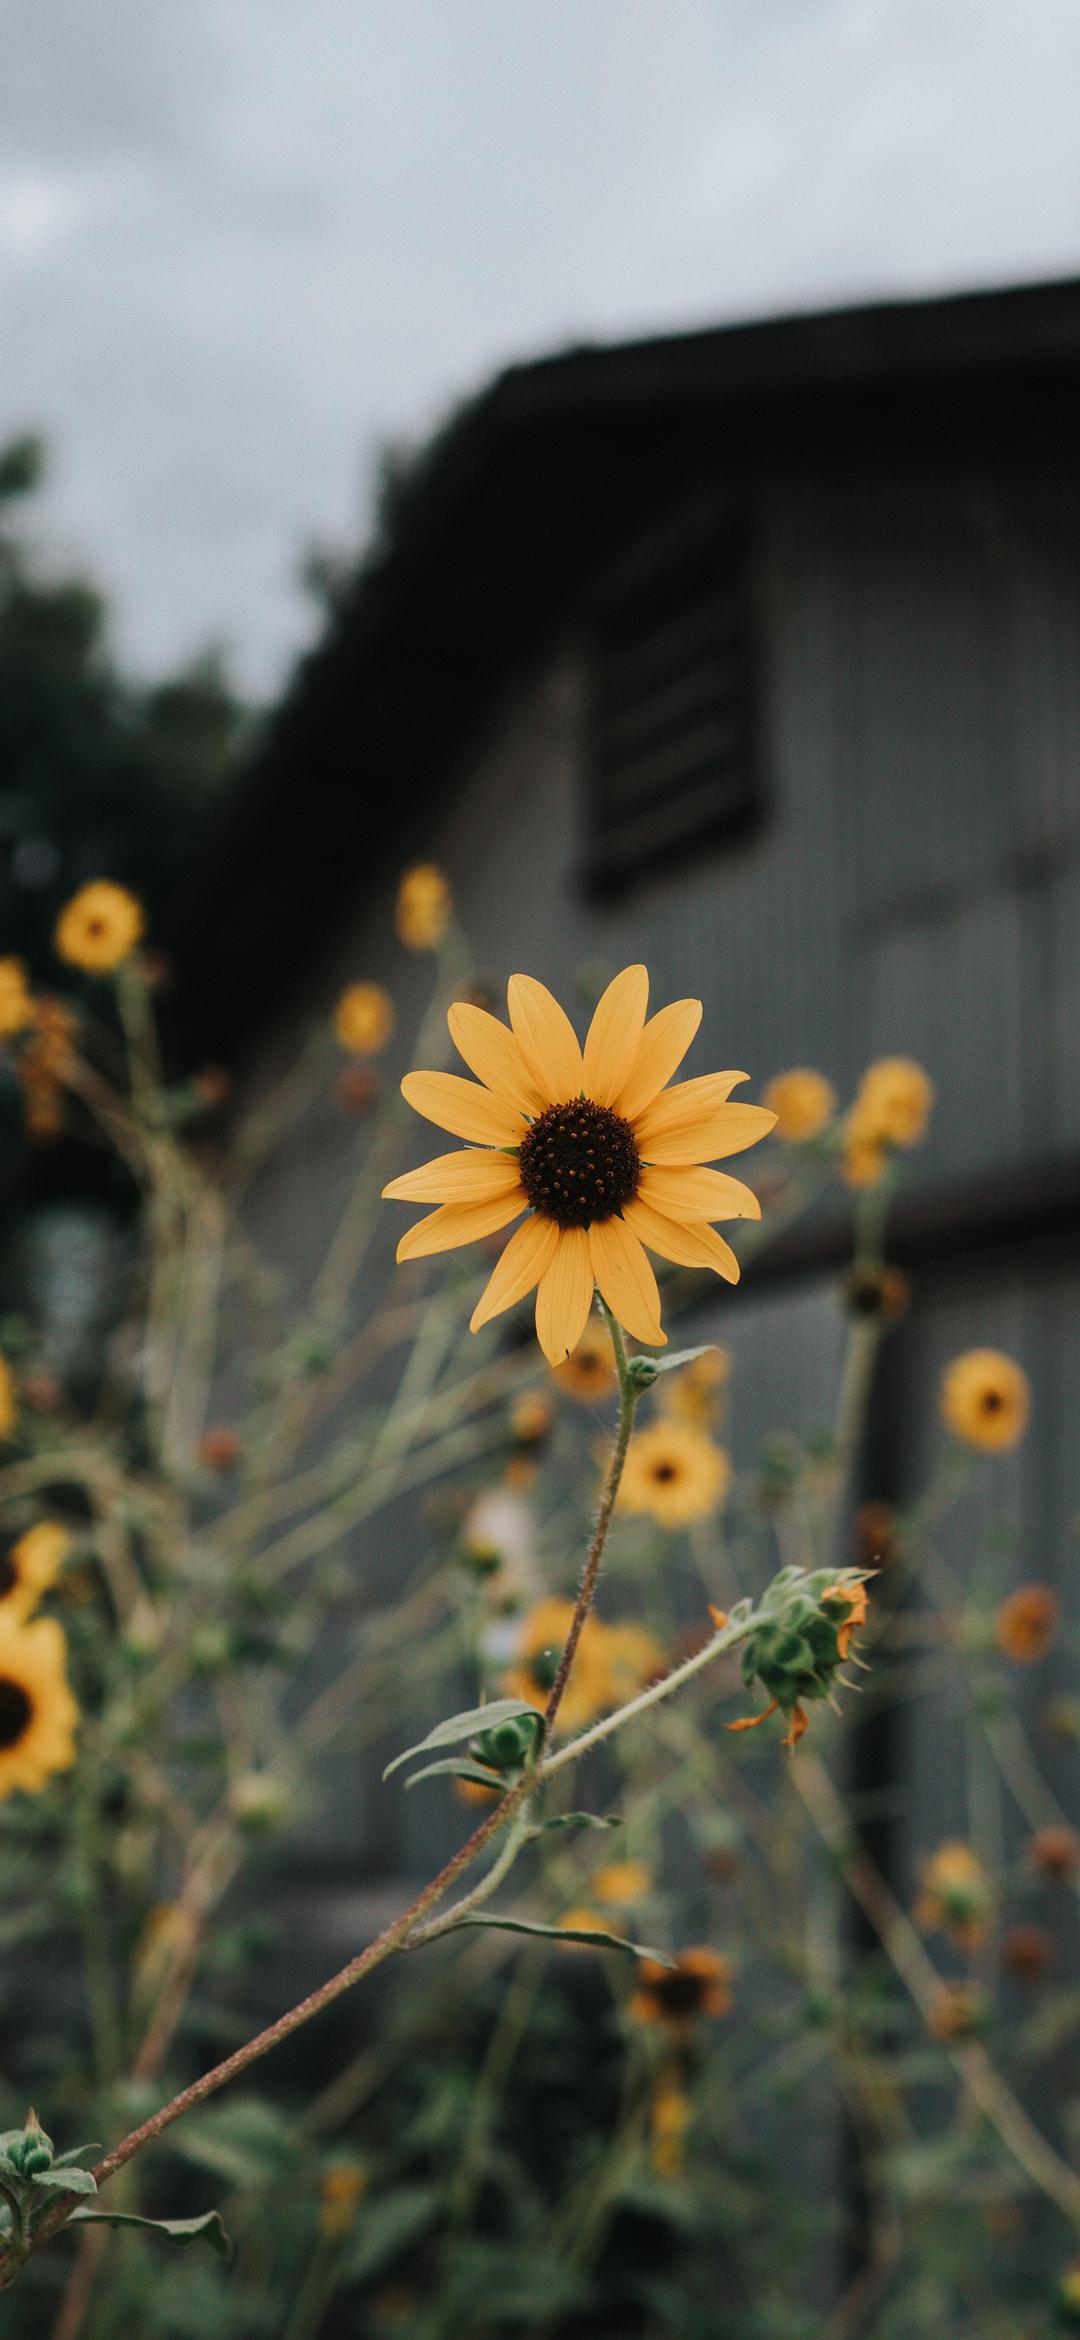 Yellow flower in front of a house - Sunflower